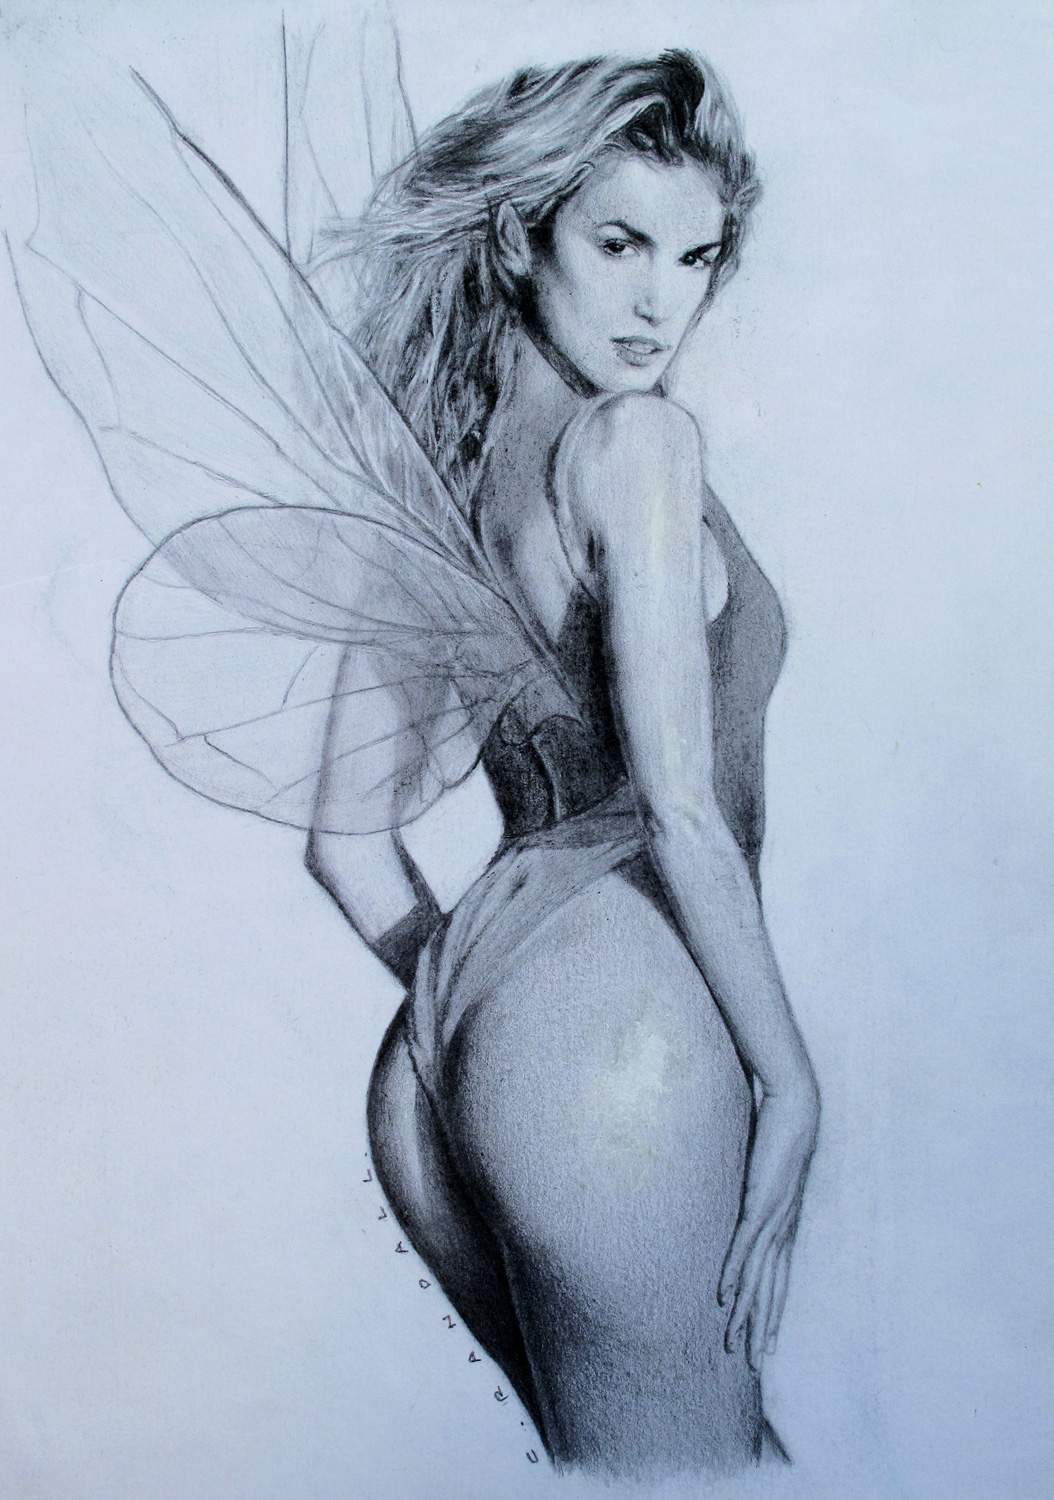 Cindy Crawford as a Pixie